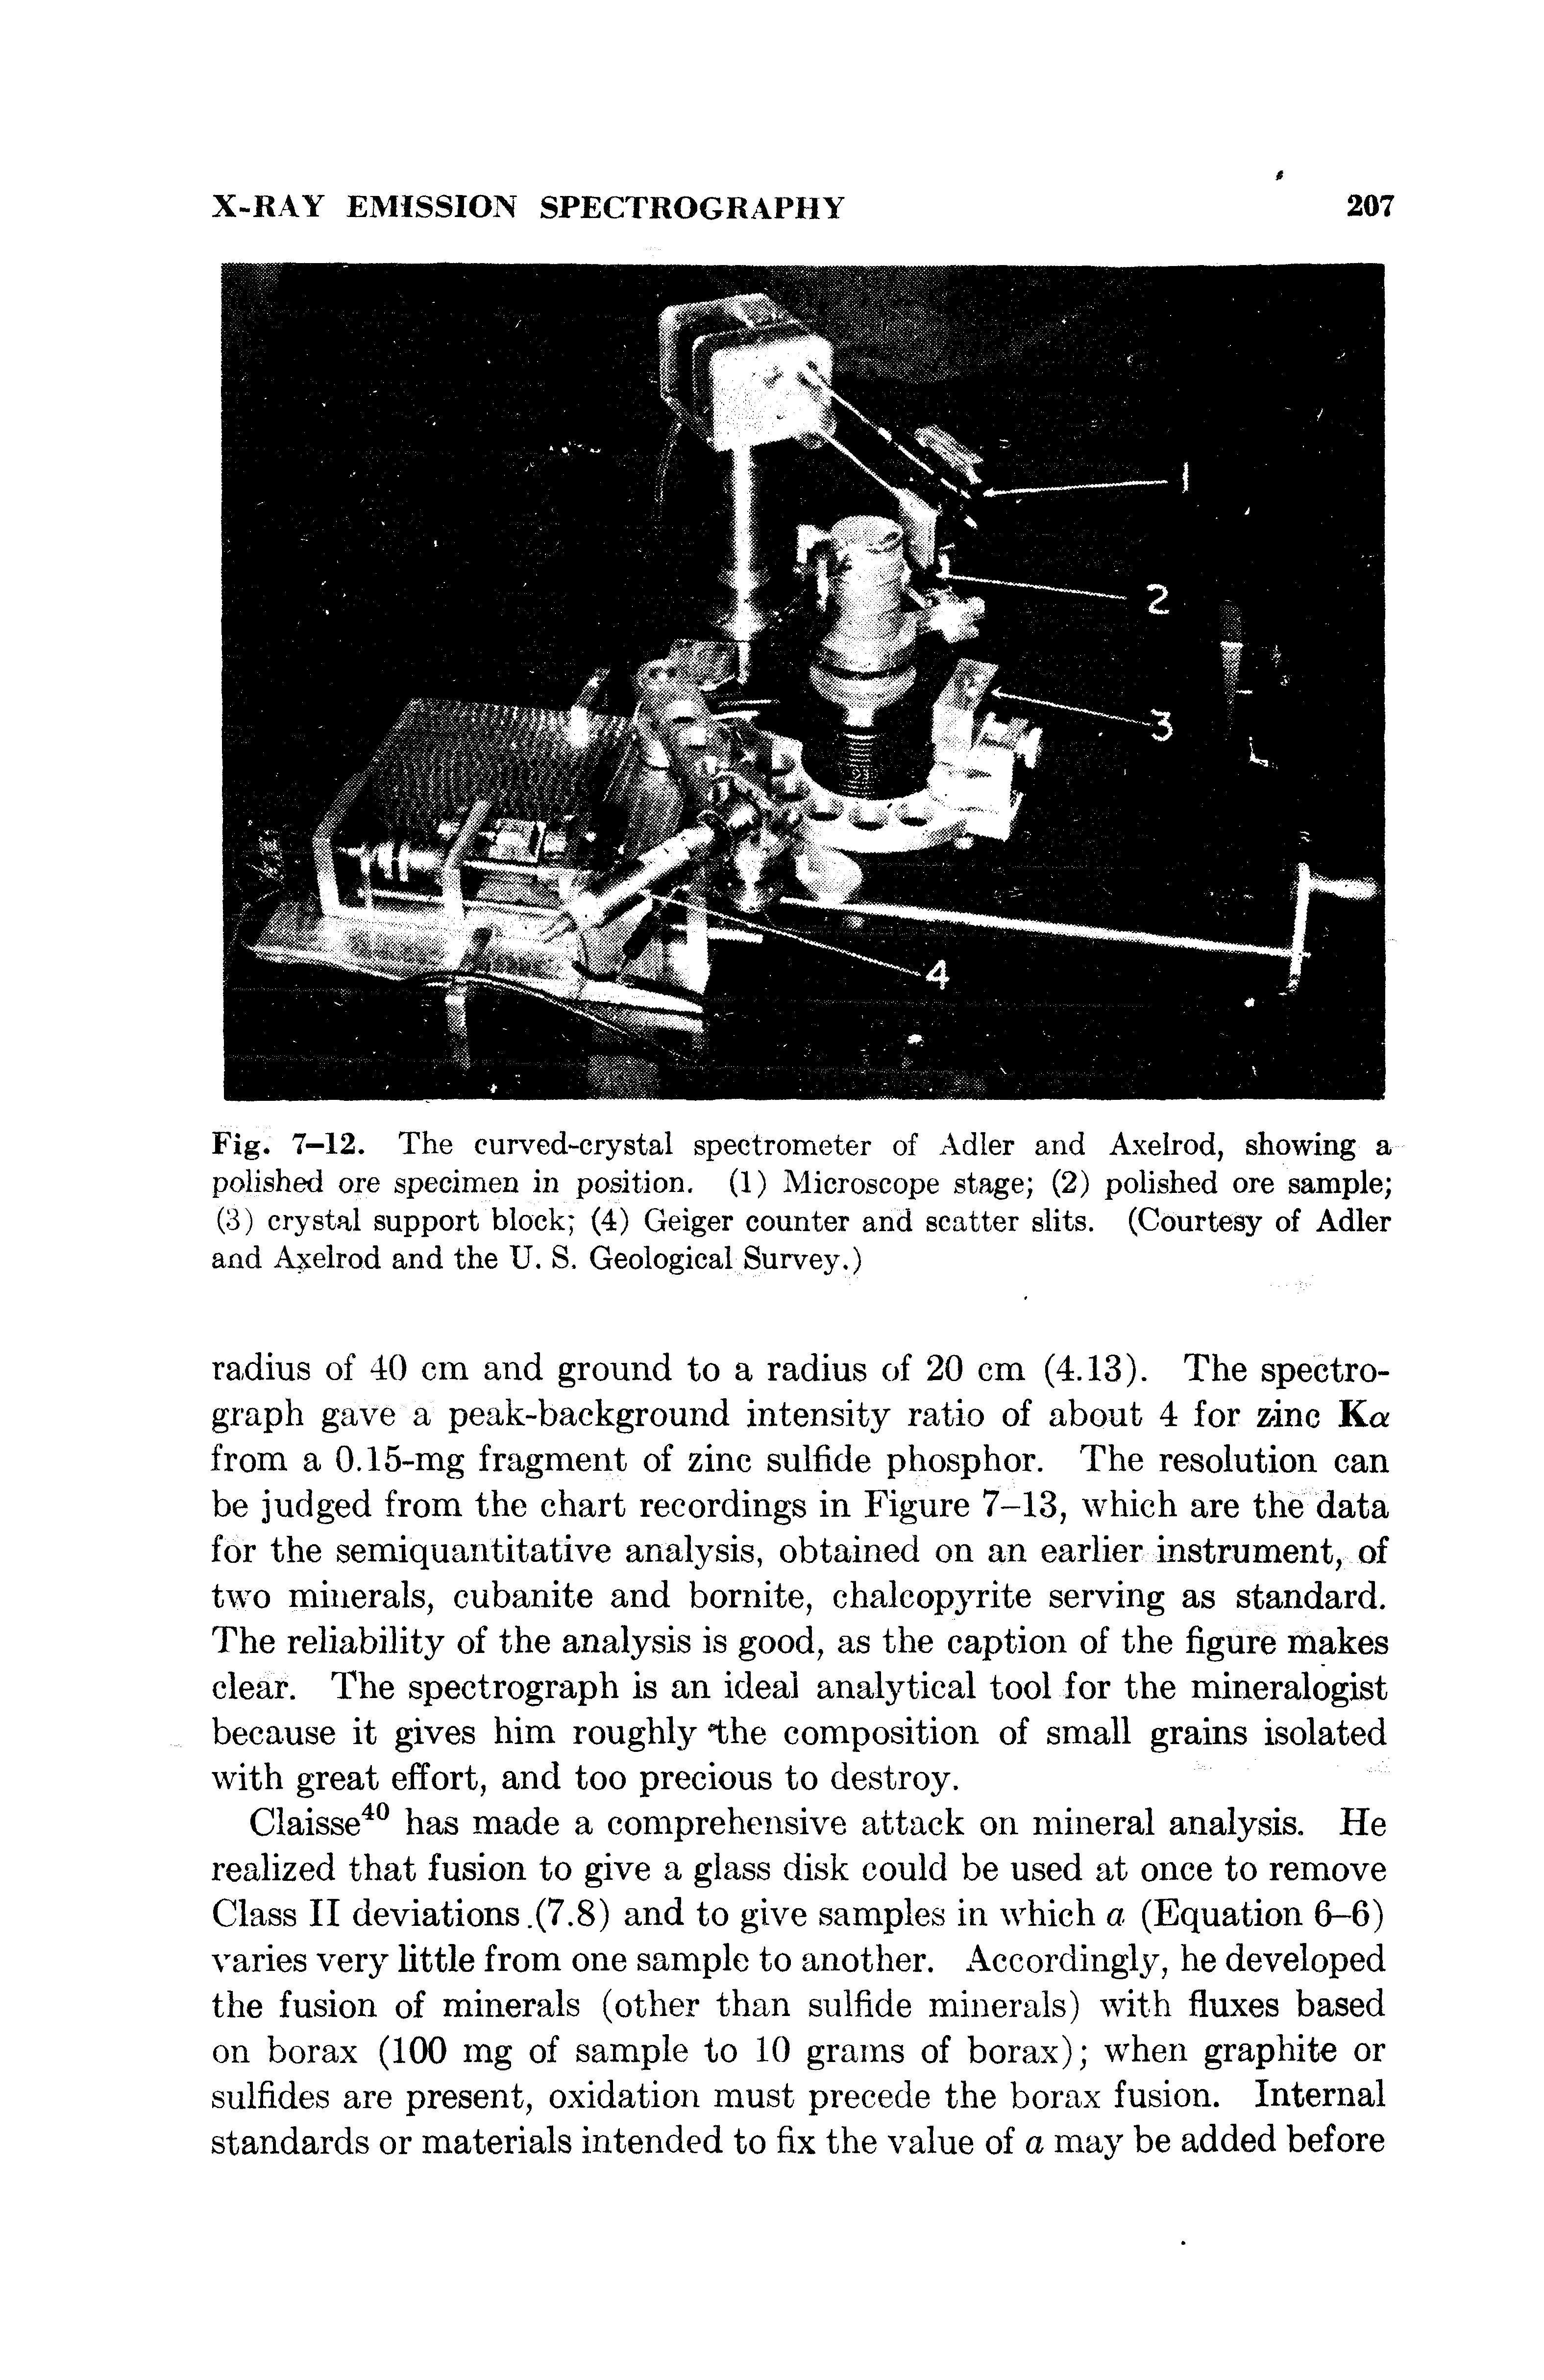 Fig. 7-12. The curved-crystal spectrometer of Adler and Axelrod, showing a polished ore specimen in position. (1) Microscope stage (2) polished ore sample (3) crystal support block (4) Geiger counter and scatter slits. (Courtesy of Adler and Ayelrod and the U. S. Geological Survey.)...